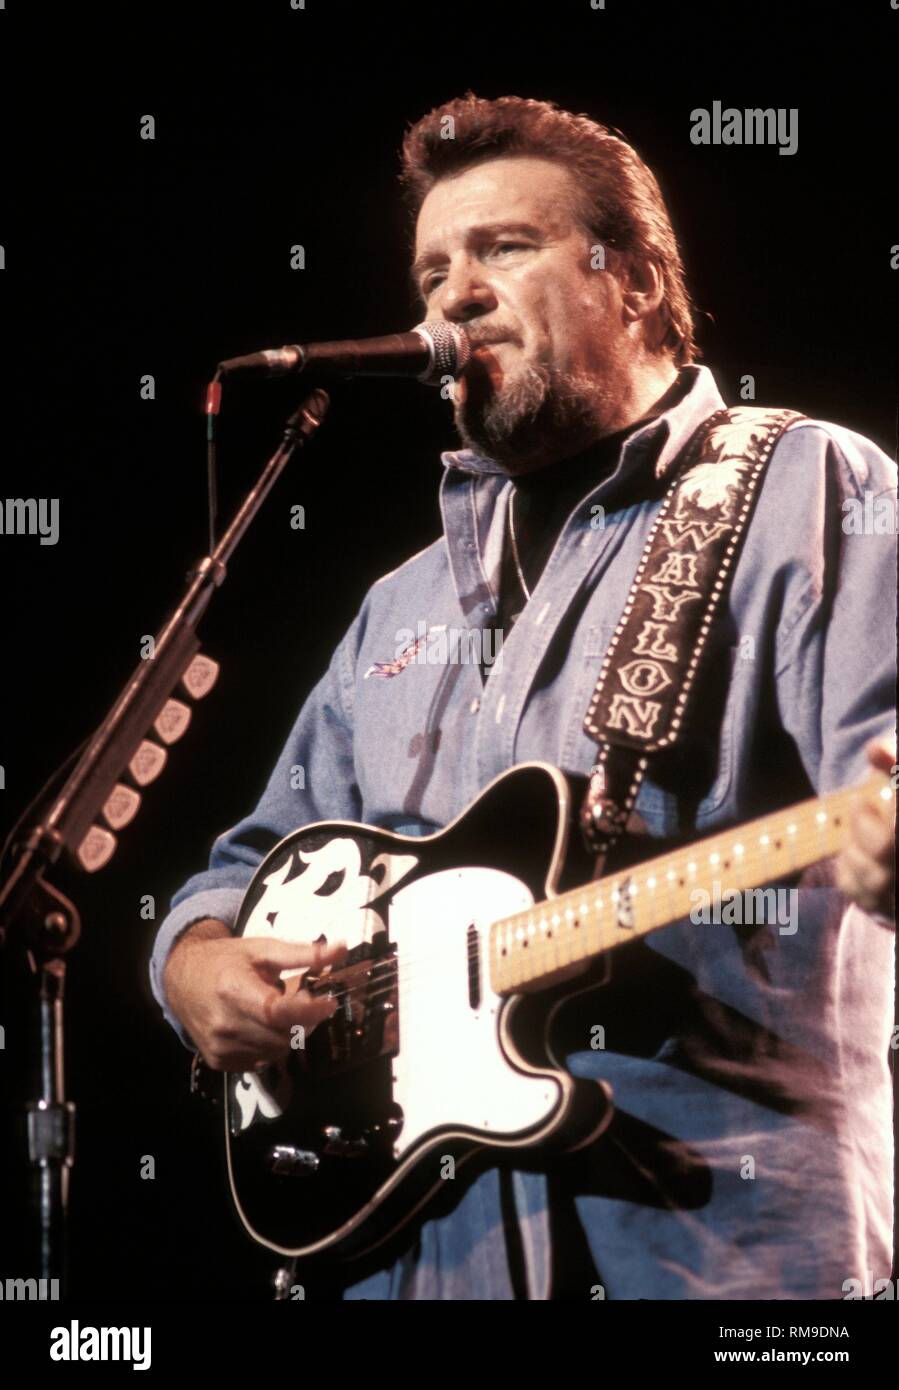 Influential country music singer and musician Waylon Jennings is shown performing on stage during a 'live' concert appearance. Stock Photo